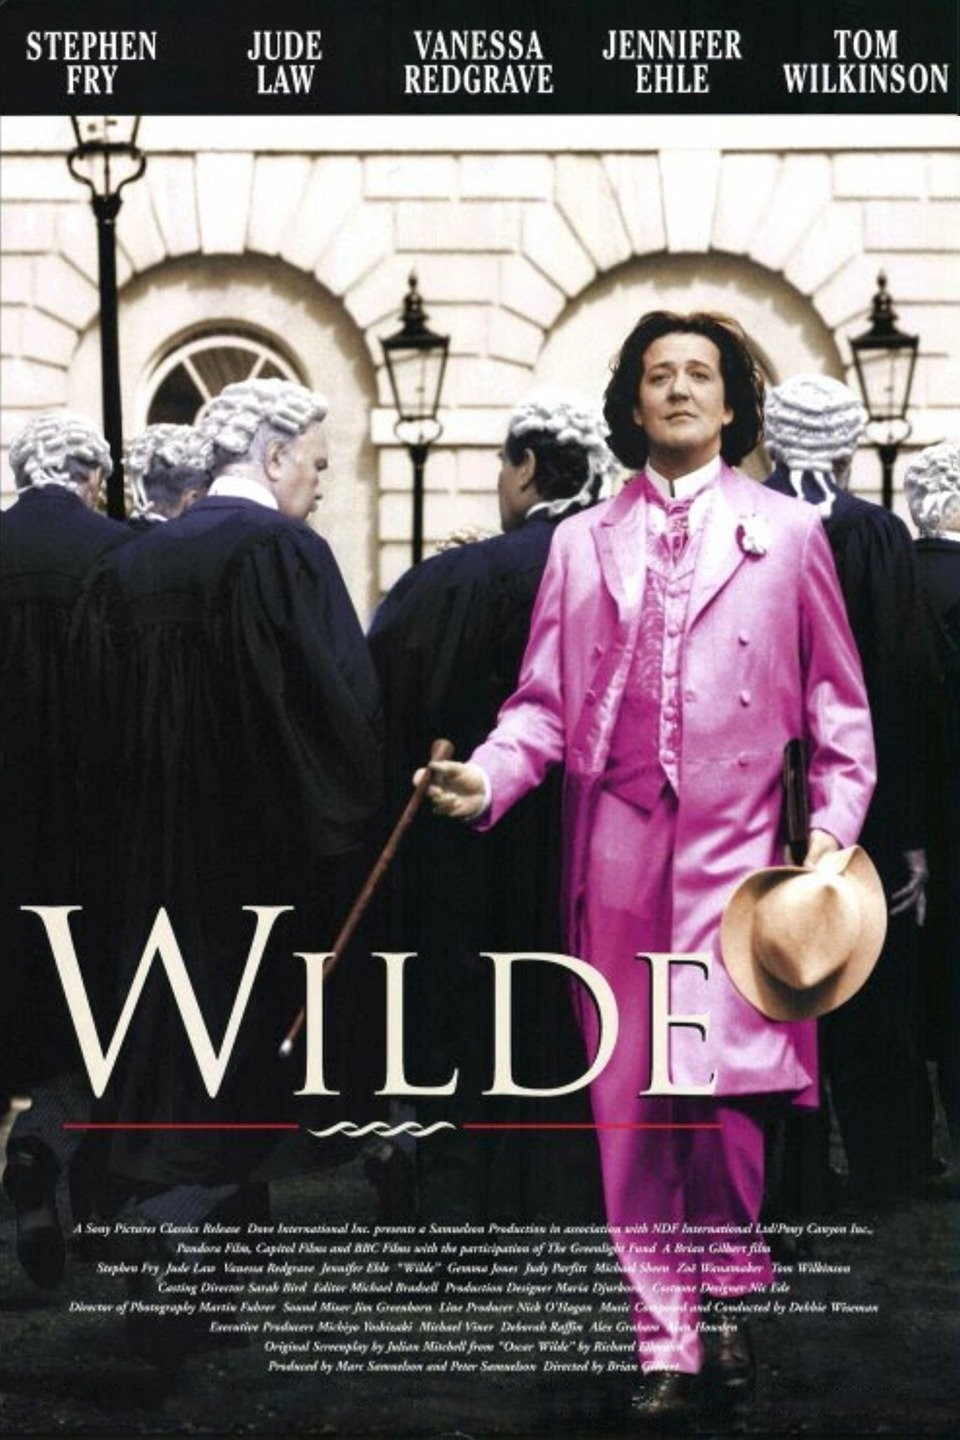 The Wilde Wedding - Rotten Tomatoes